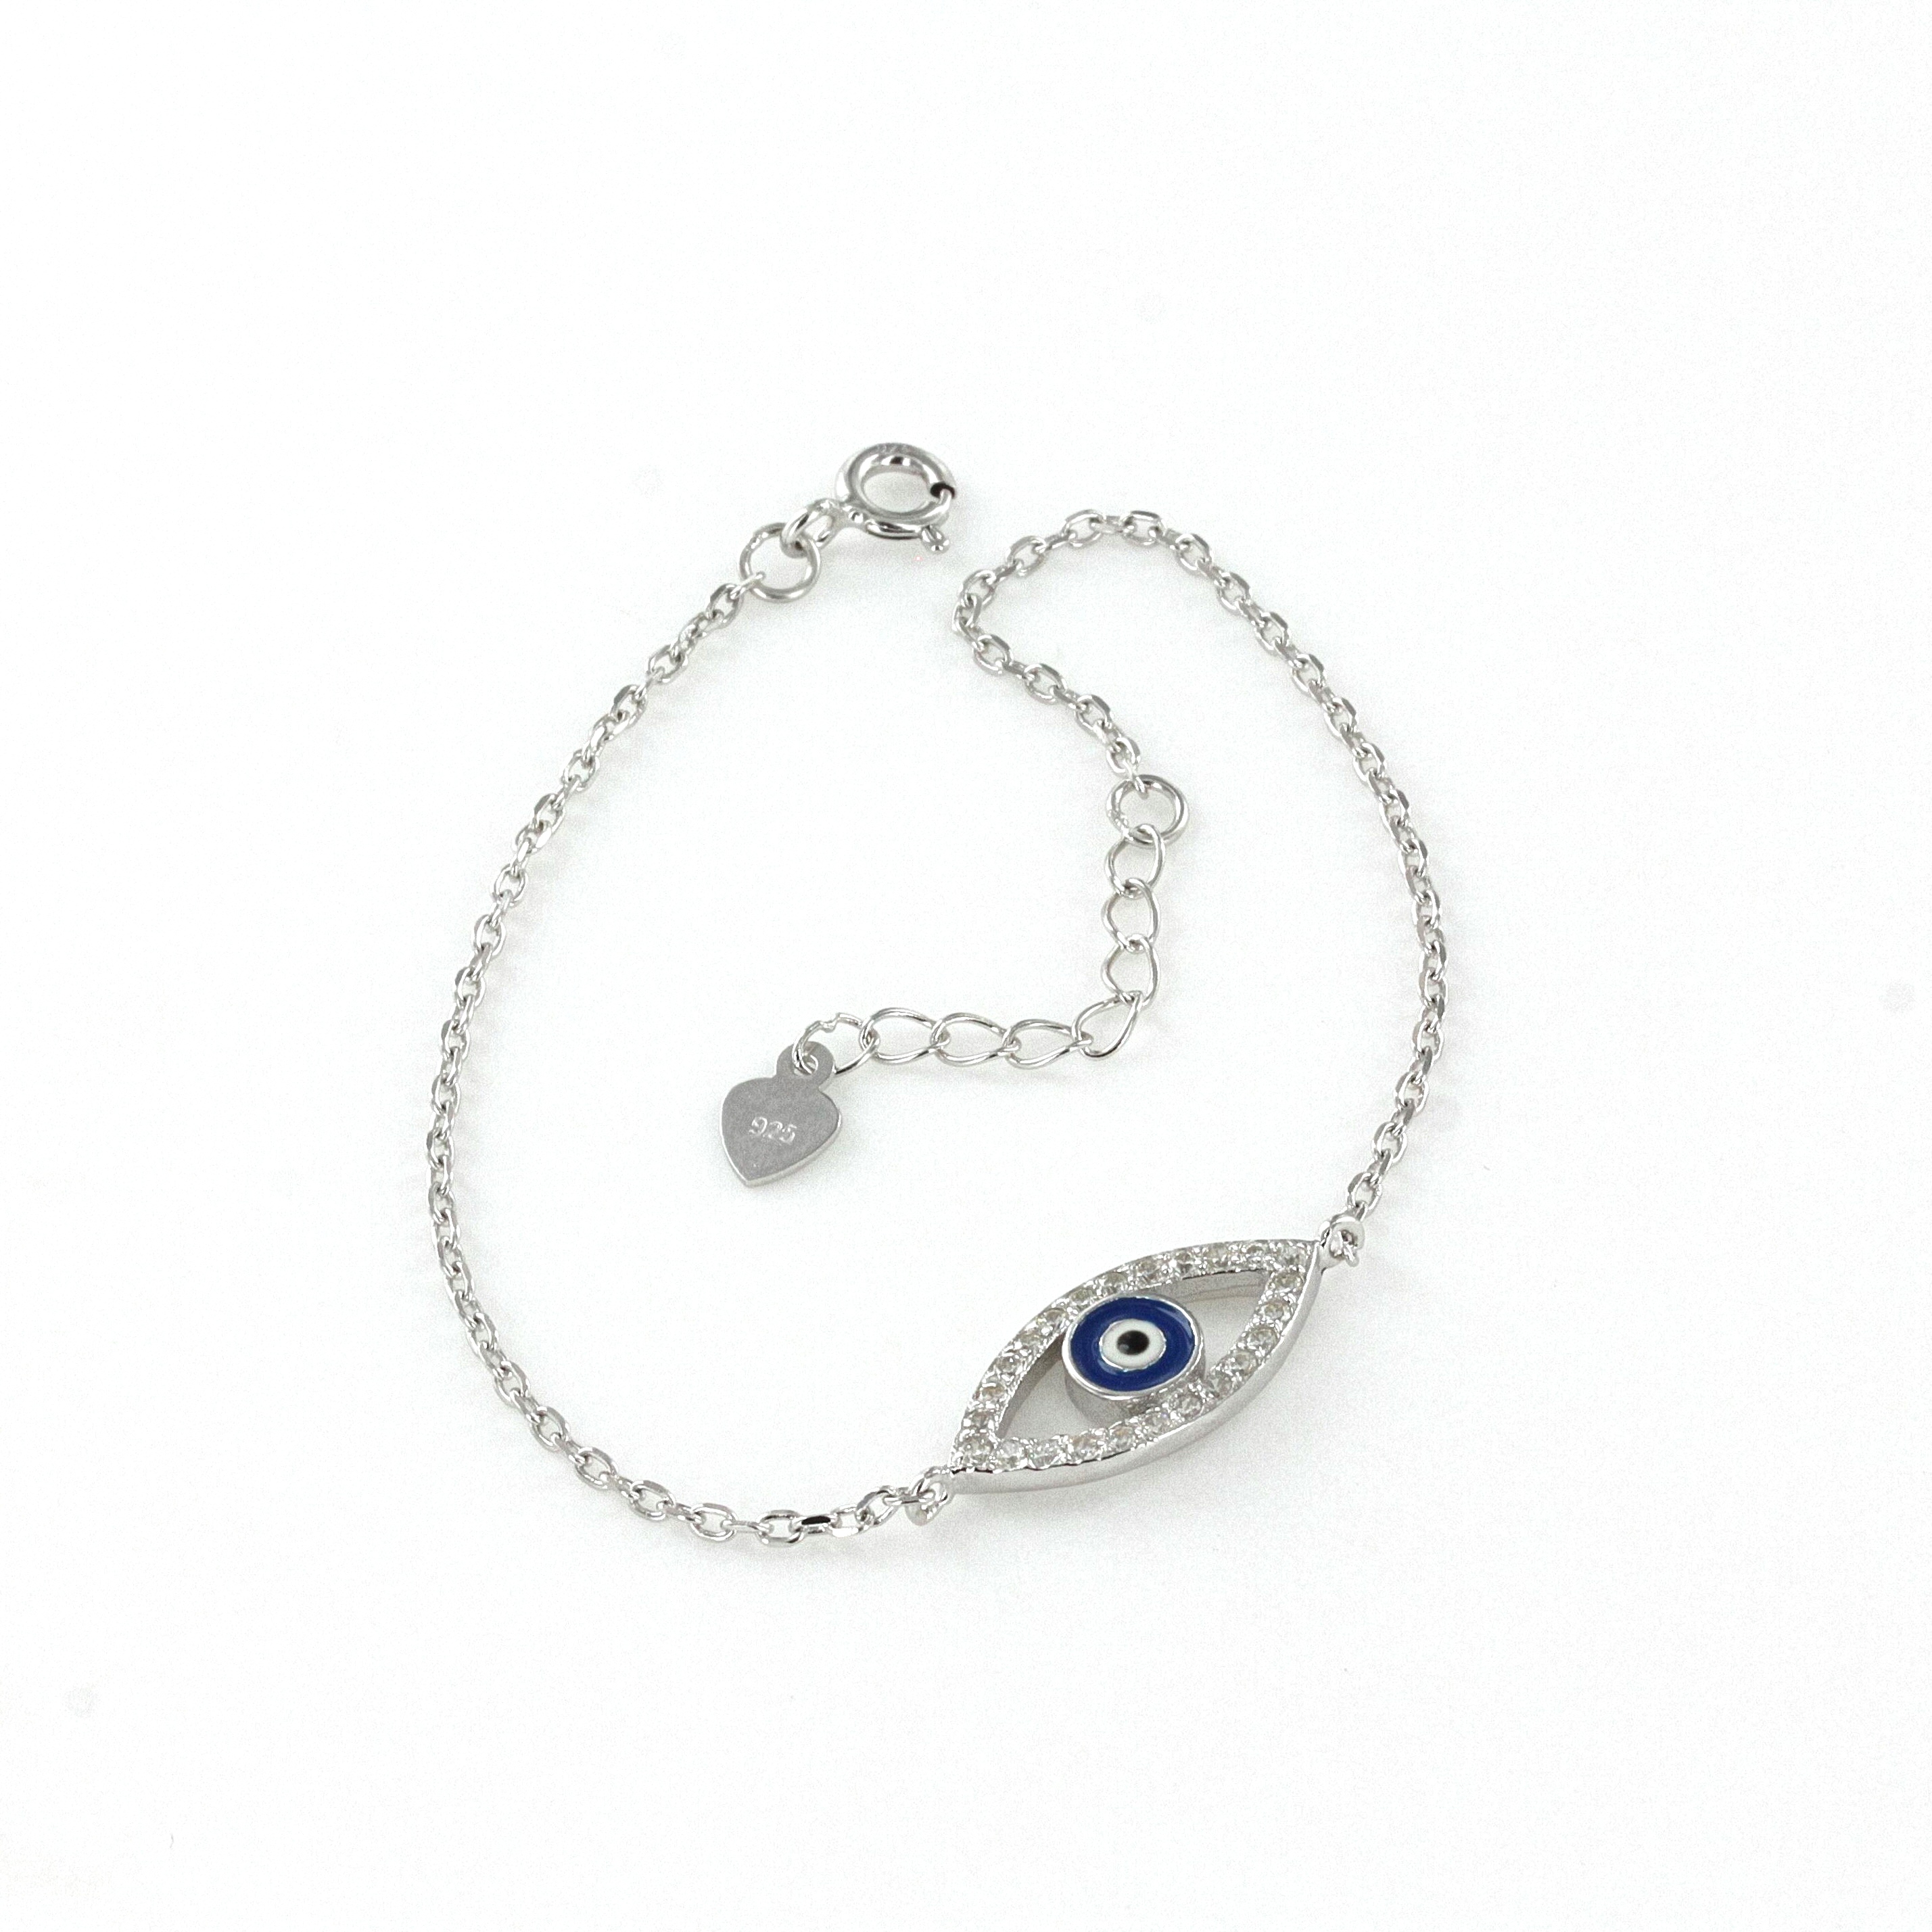 Evil Eye with Cubic Zirconias 18mm x 9mm